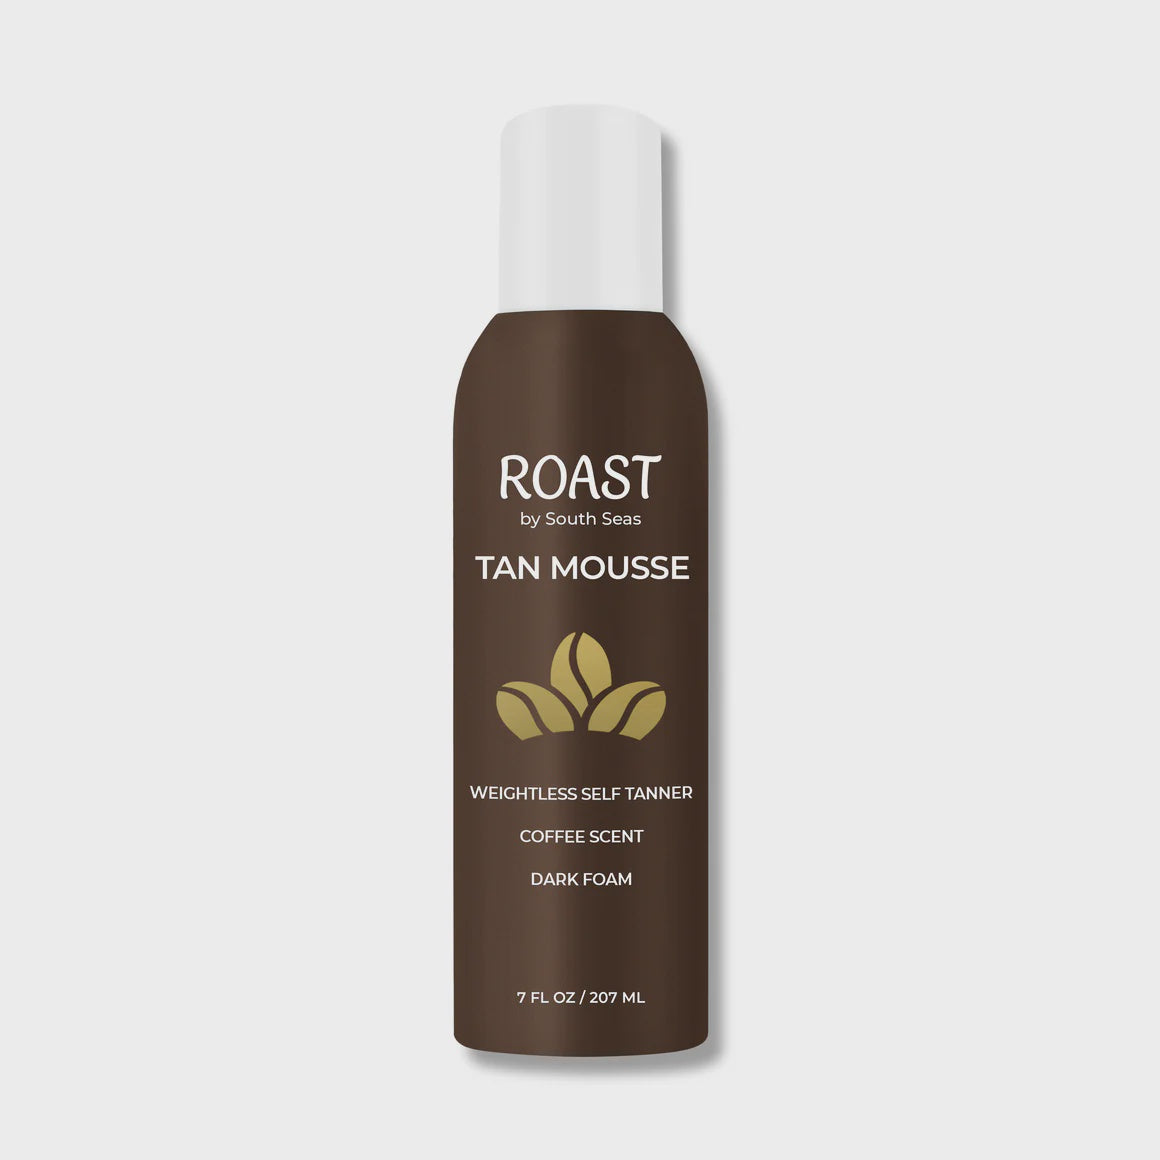 A bottle of "Roast Dark Tan Mousse" by South Seas Skincare, inspired by the serene vibes of a Scottsdale Arizona bungalow, is labeled as a weightless self-tanner with coffee scent, presented against a plain white background. The bottle holds 7 fluid ounces (207 mL).